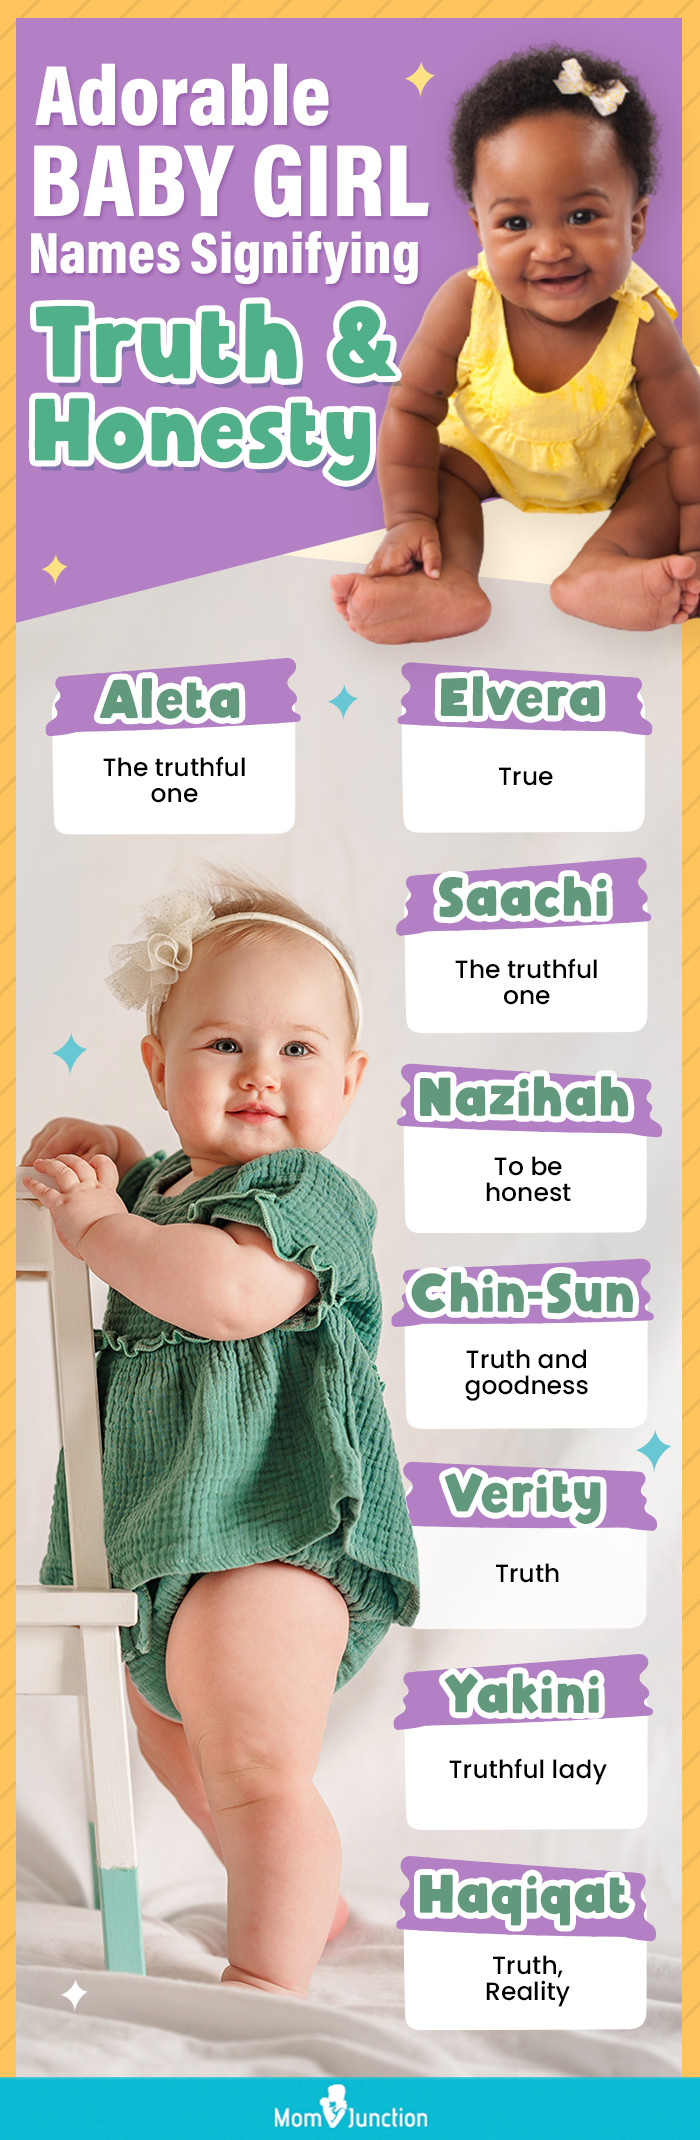 adorable baby girl names signifying truth and honesty (infographic)